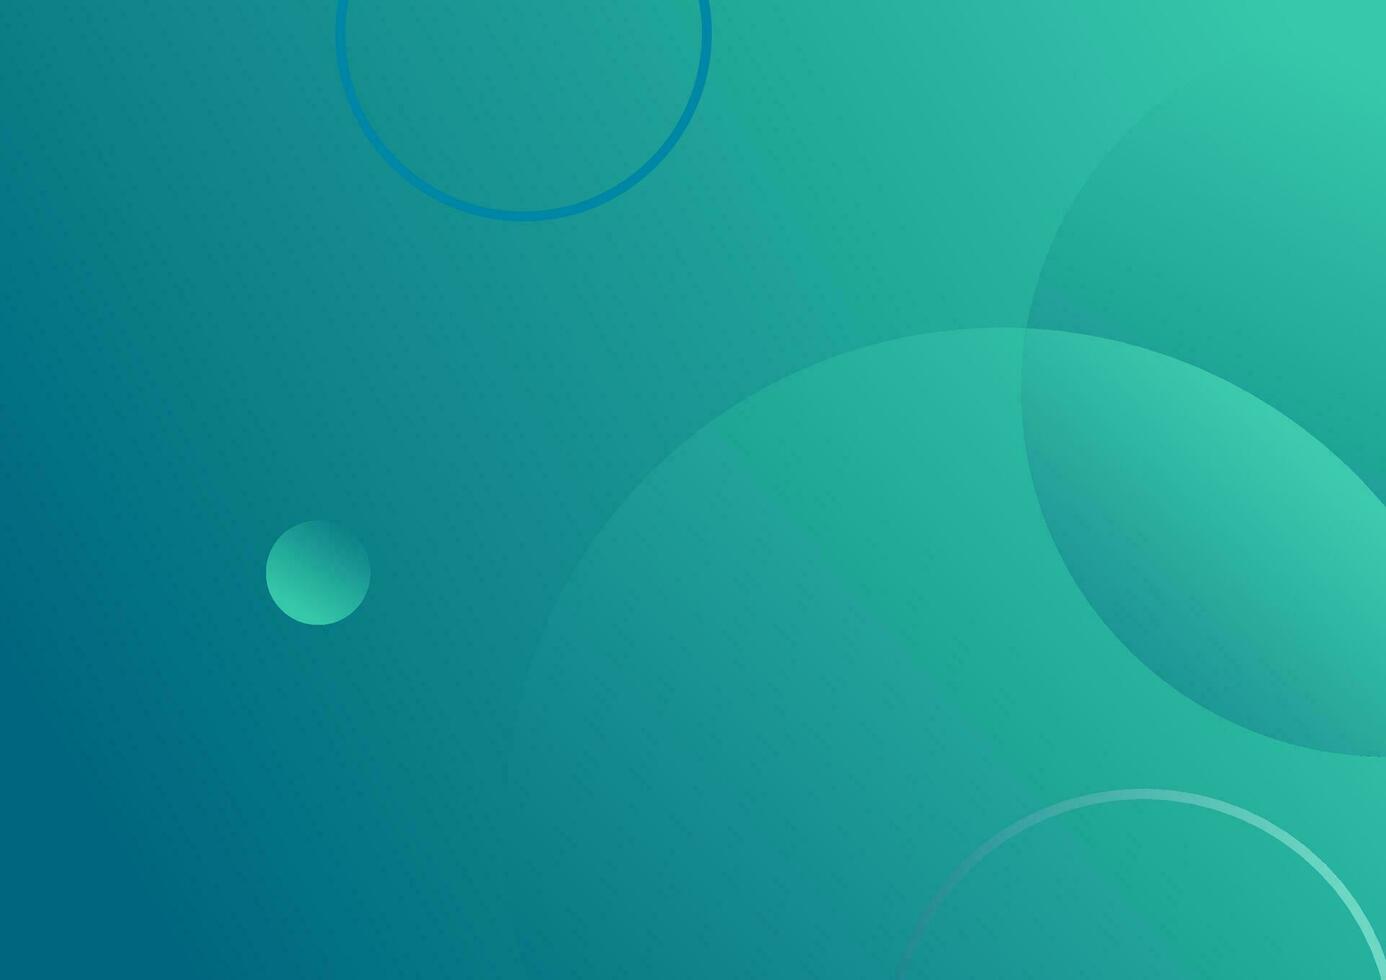 Abstract background design vector, with a blue and green color palette, incorporating circular elements. Featuring a copy space area vector